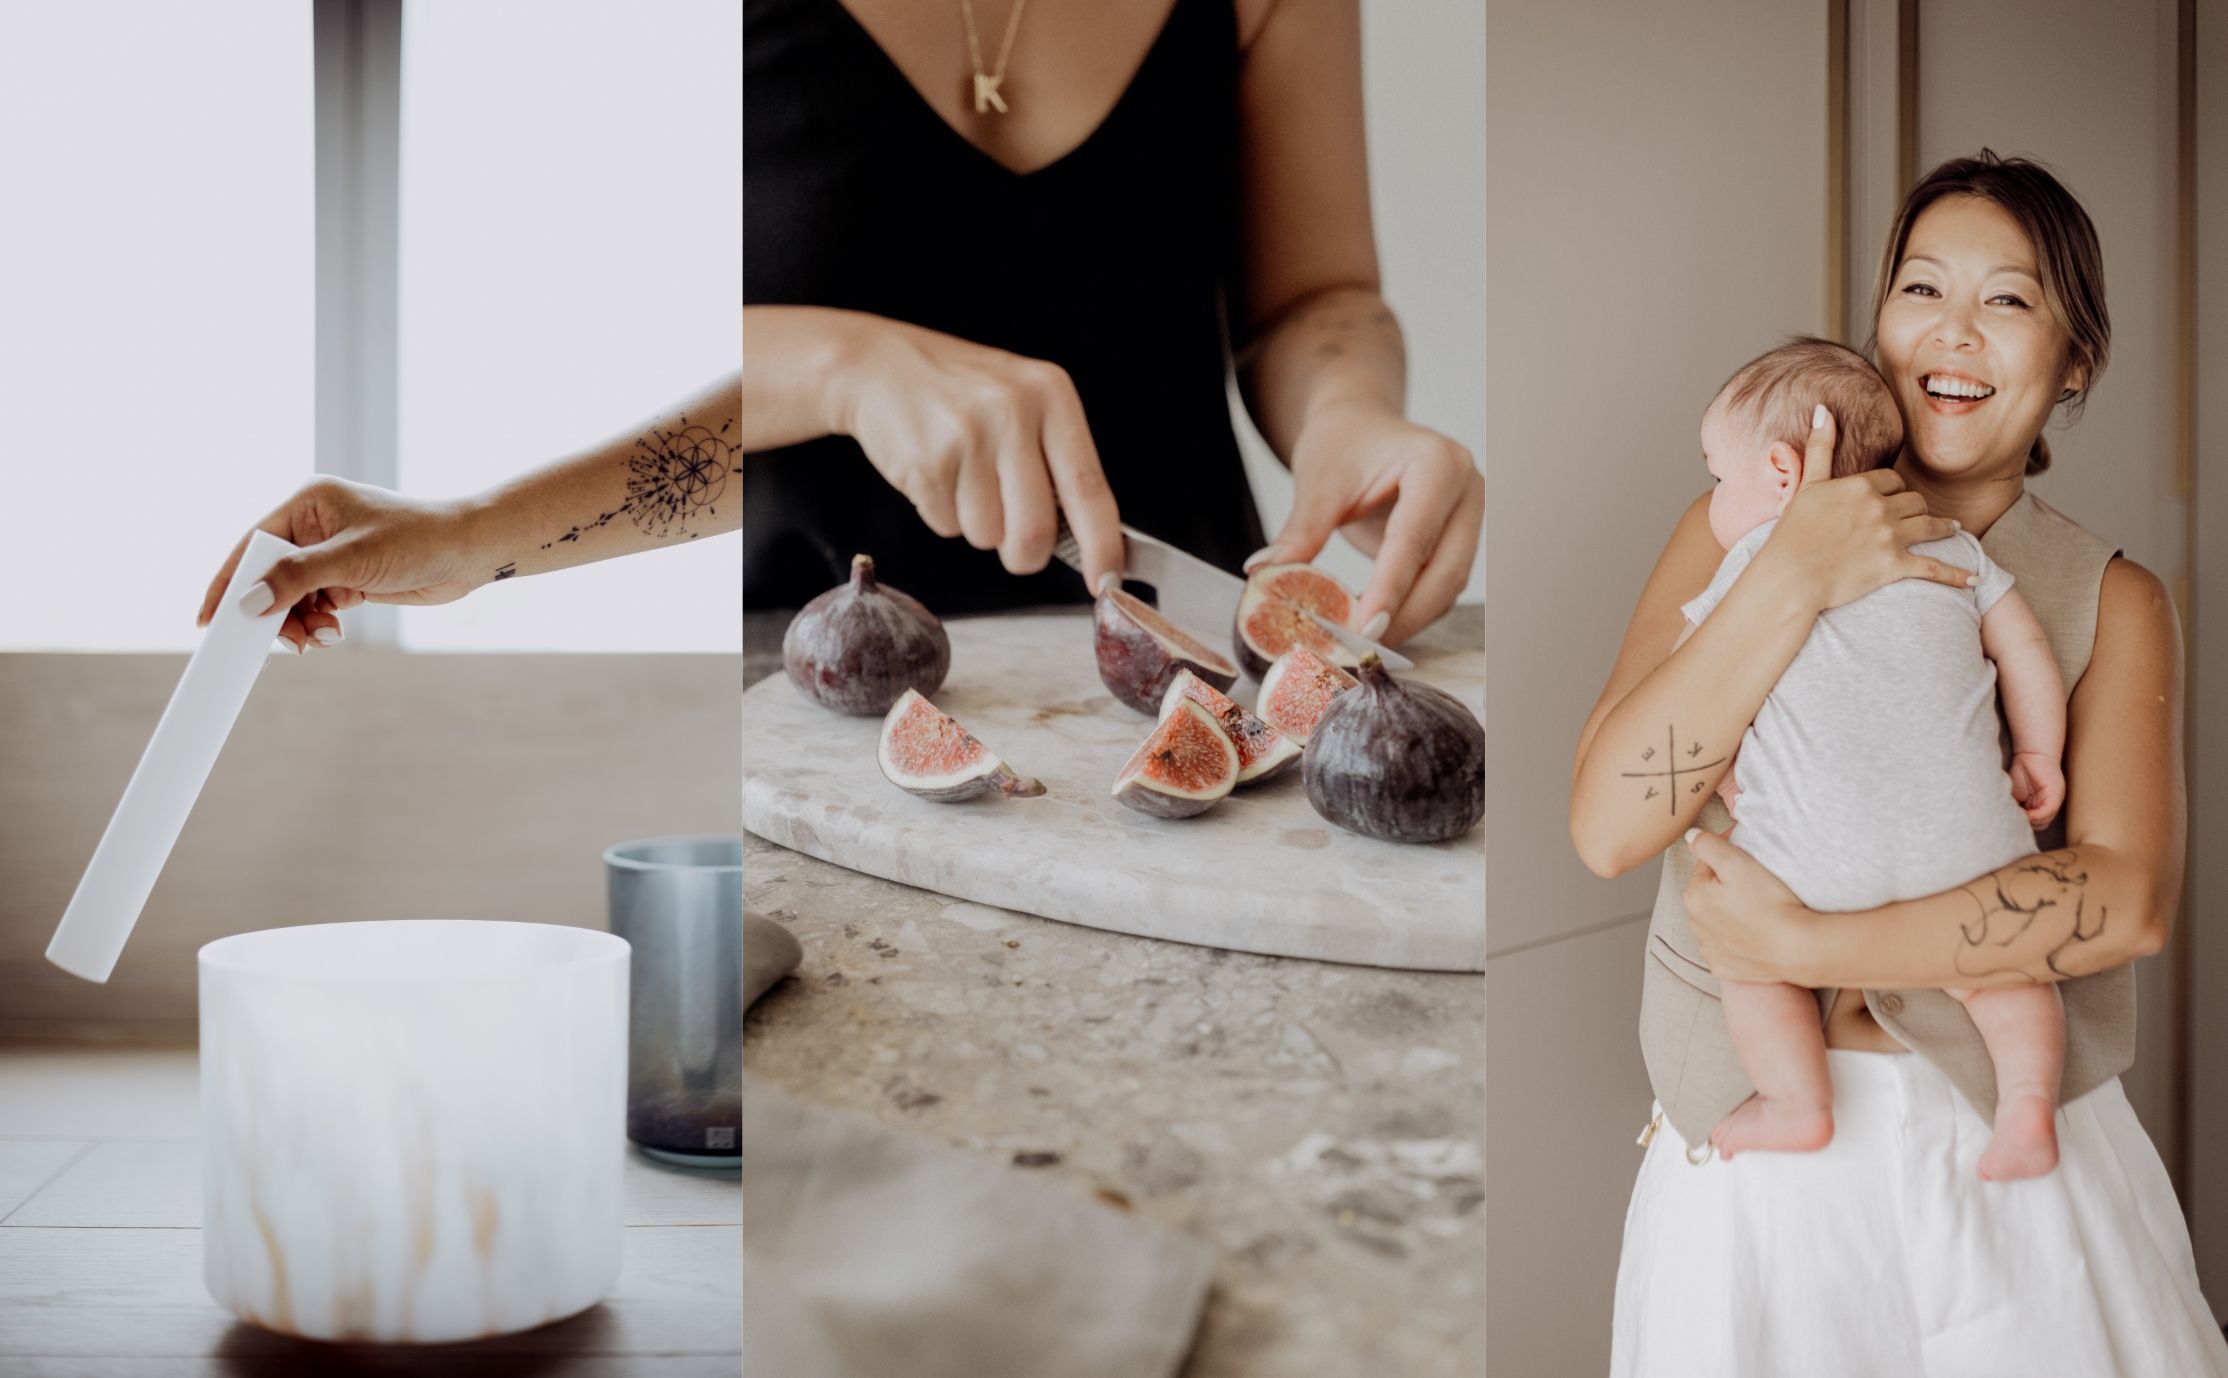 Collage of 3 images. Left:  a woman’s tattooed arm holding a mallet above a crystal singing bowl, Middle: a woman in a black top cutting figs, Right: a woman in beige top and white pants holding a baby 